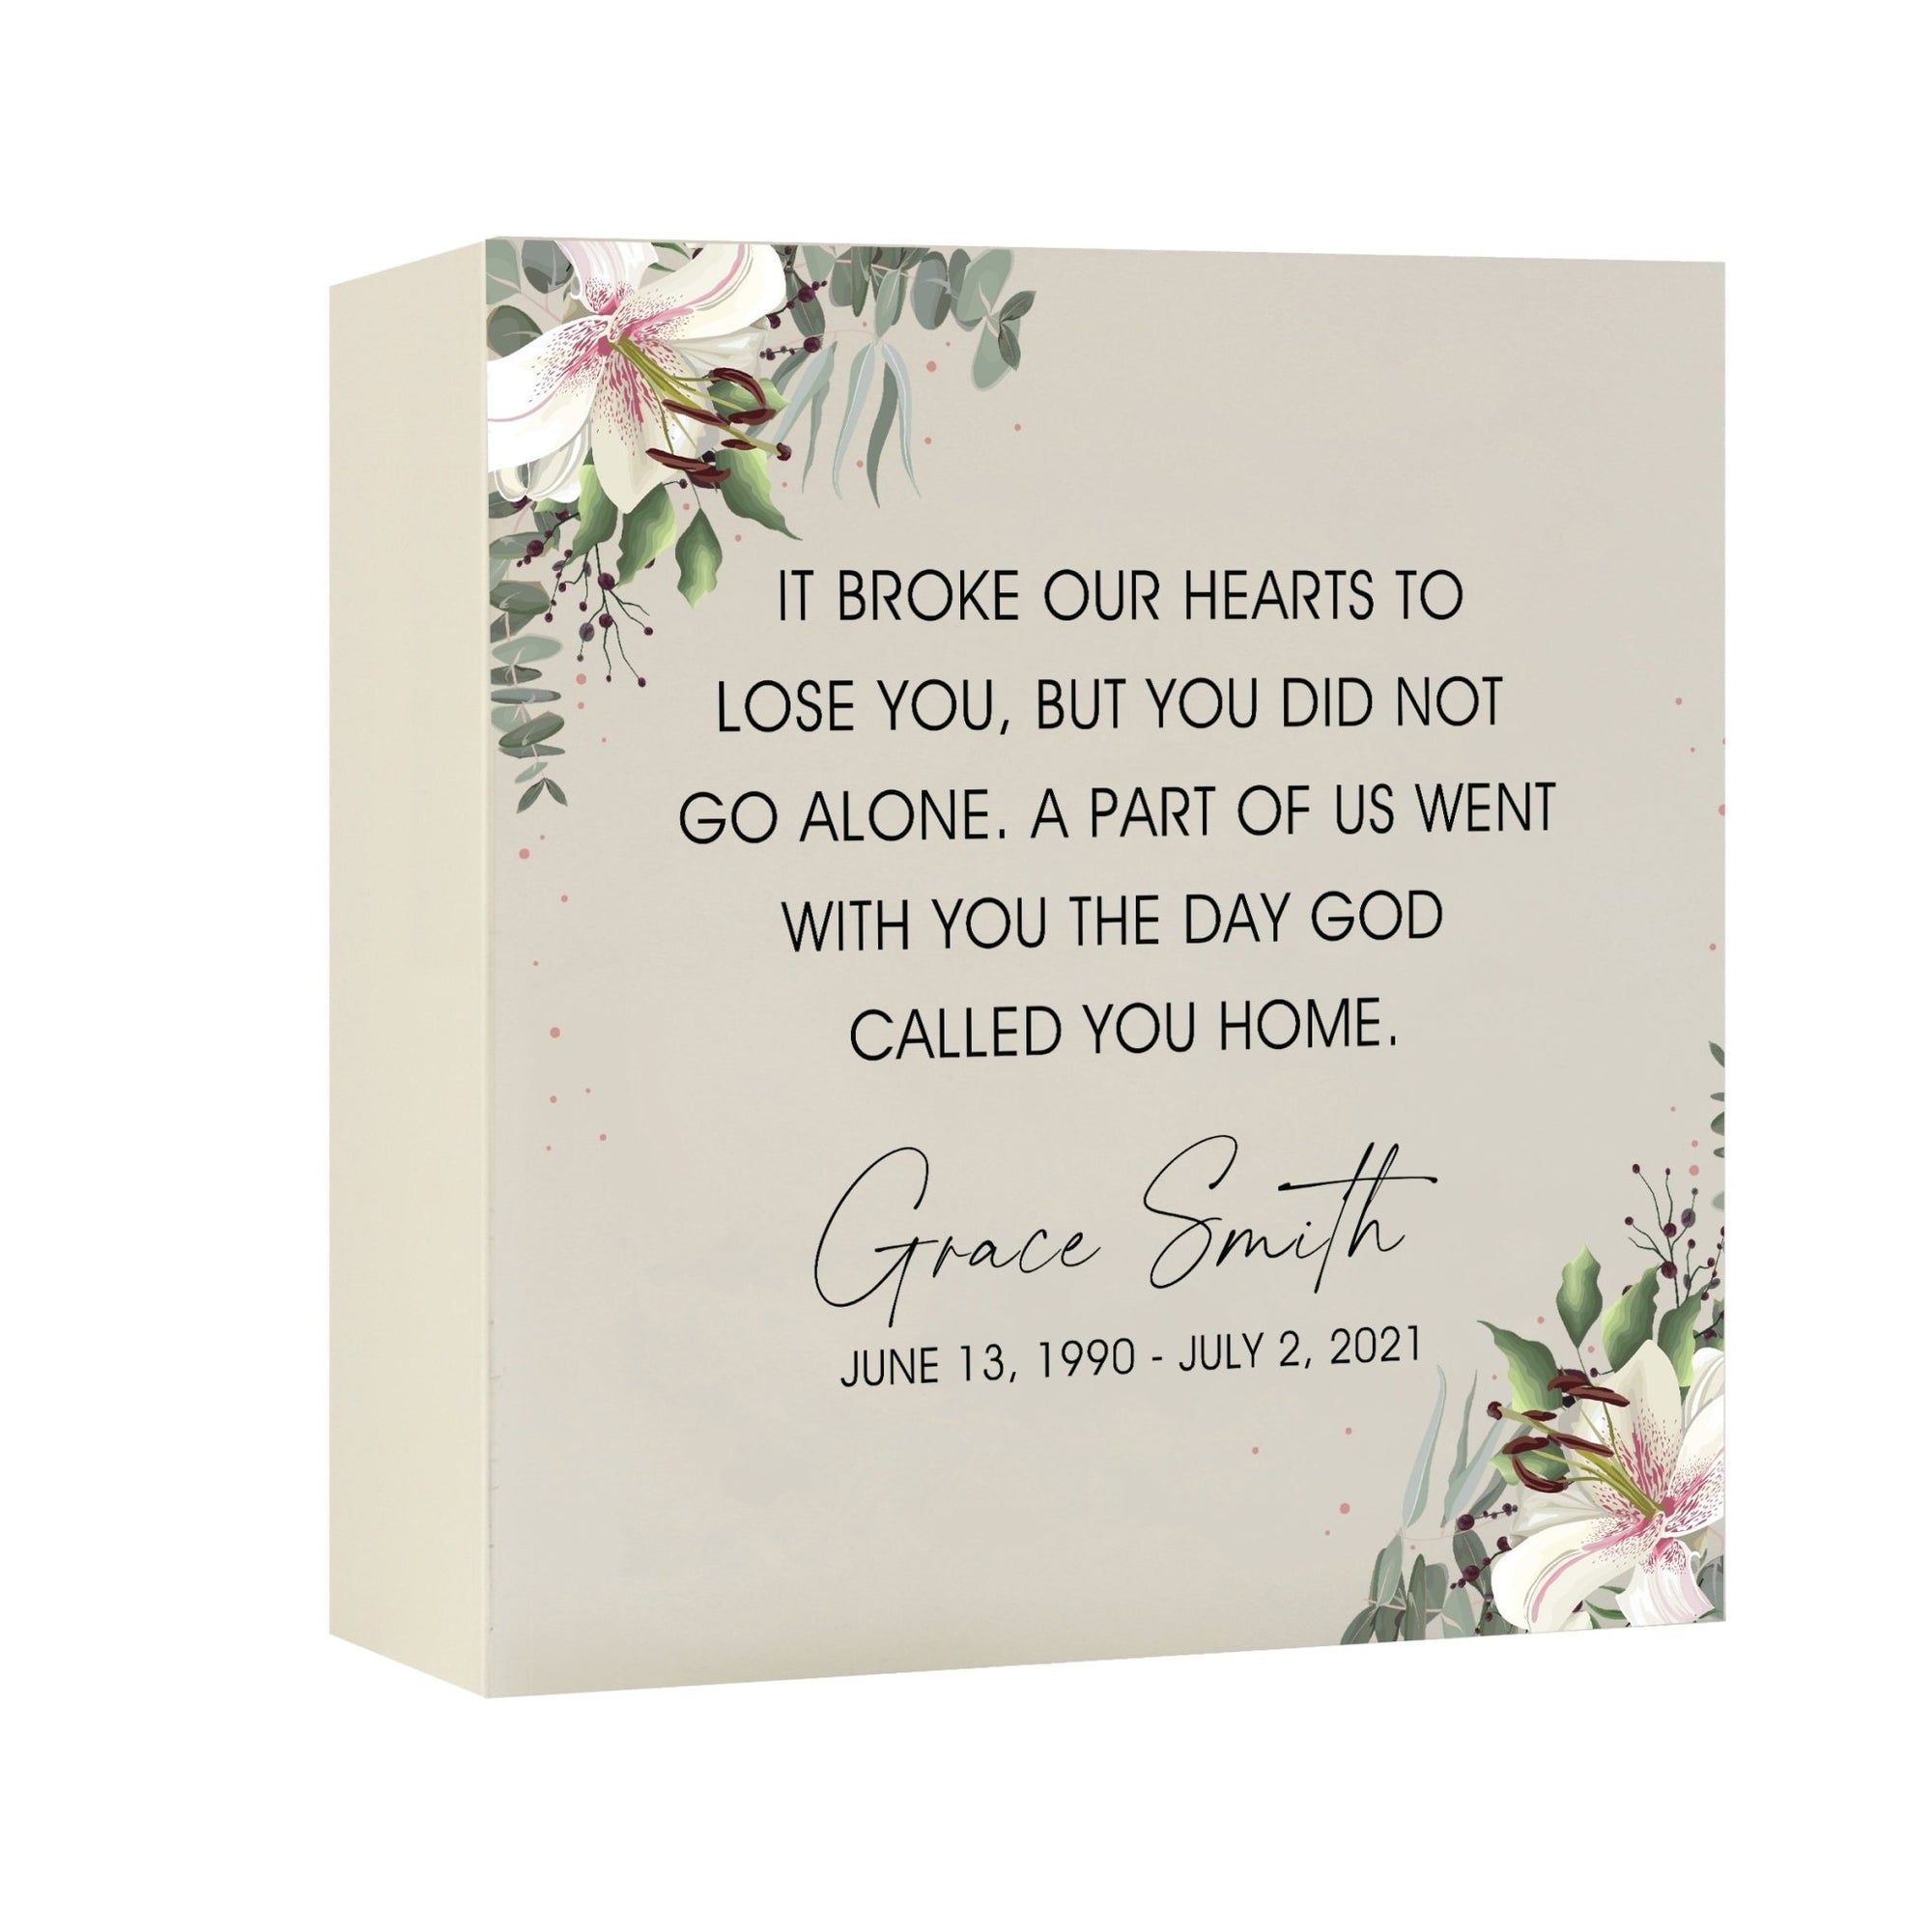 Timeless Human Memorial Shadow Box Urn With Inspirational Verse in Ivory - It Broke Our Hearts - LifeSong Milestones